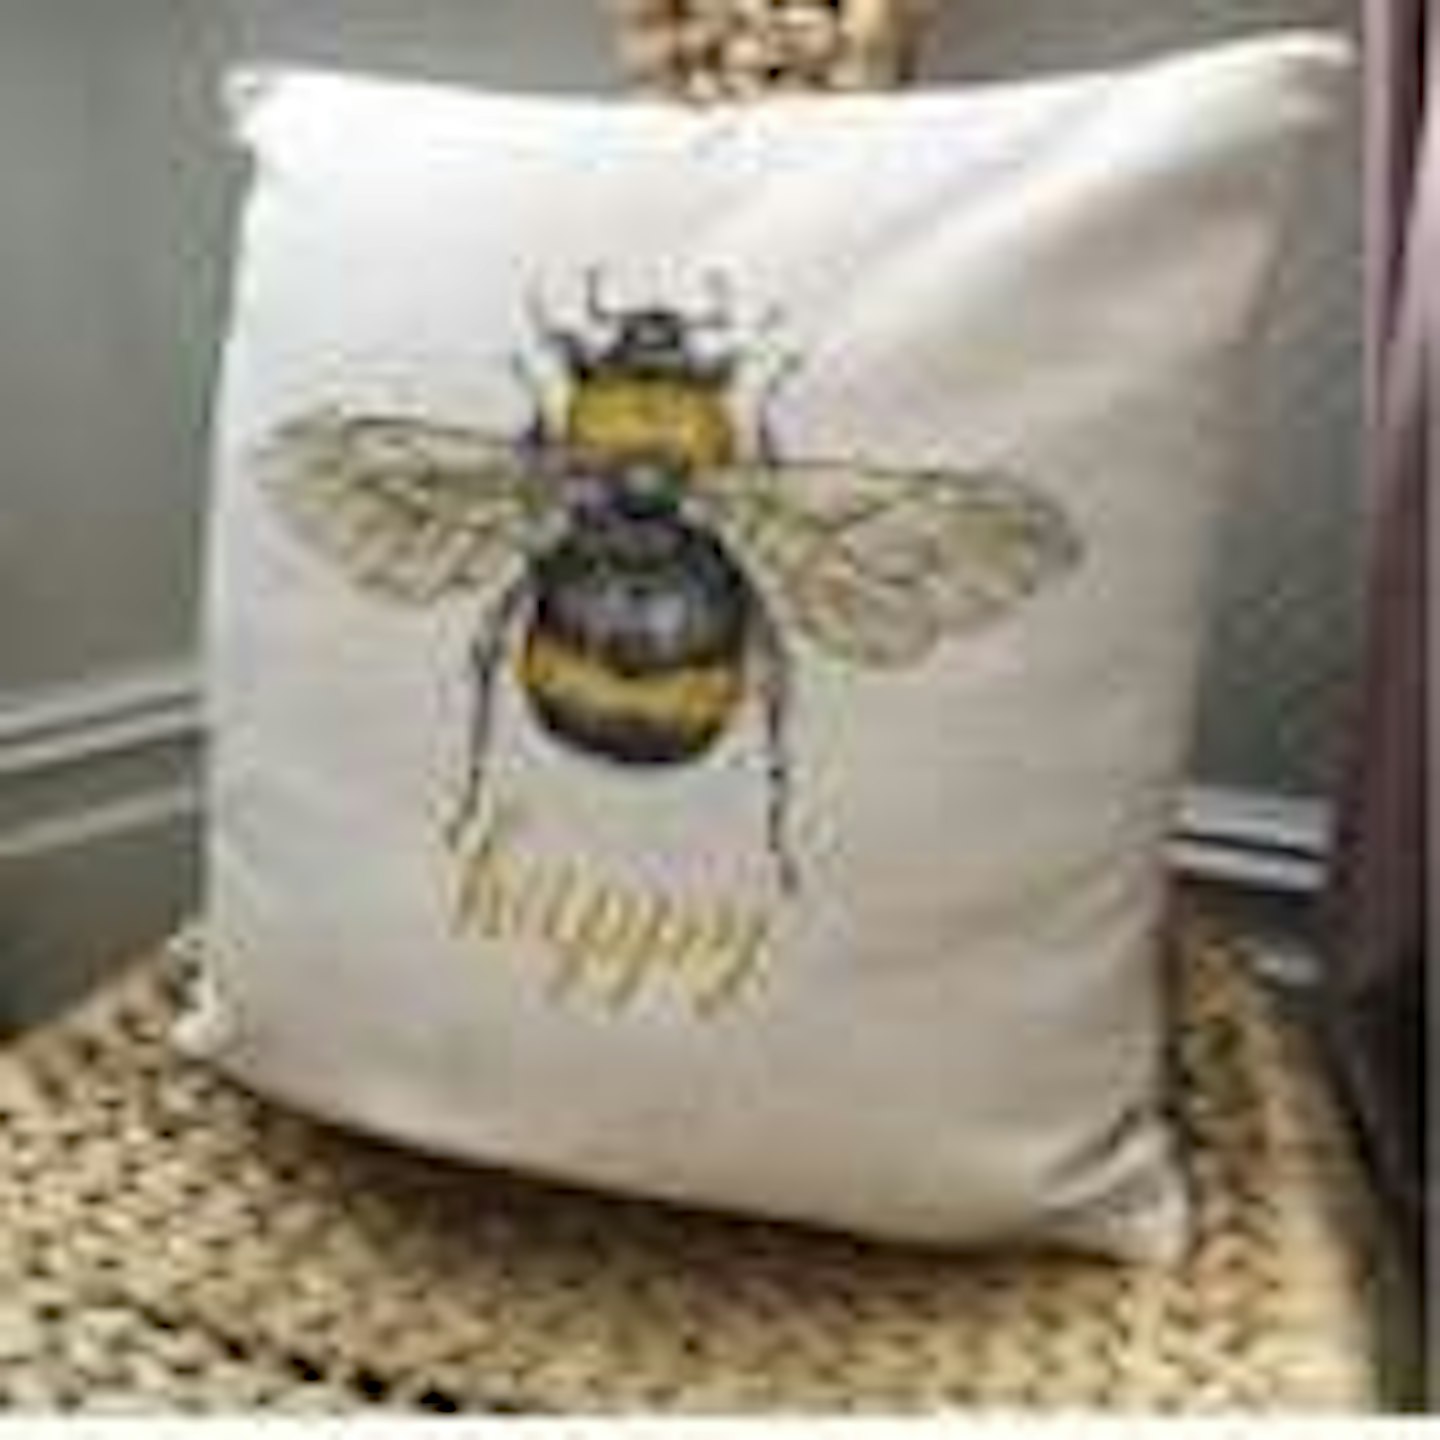 Bee Happy, Bumble Bee Gift Cushion Cover